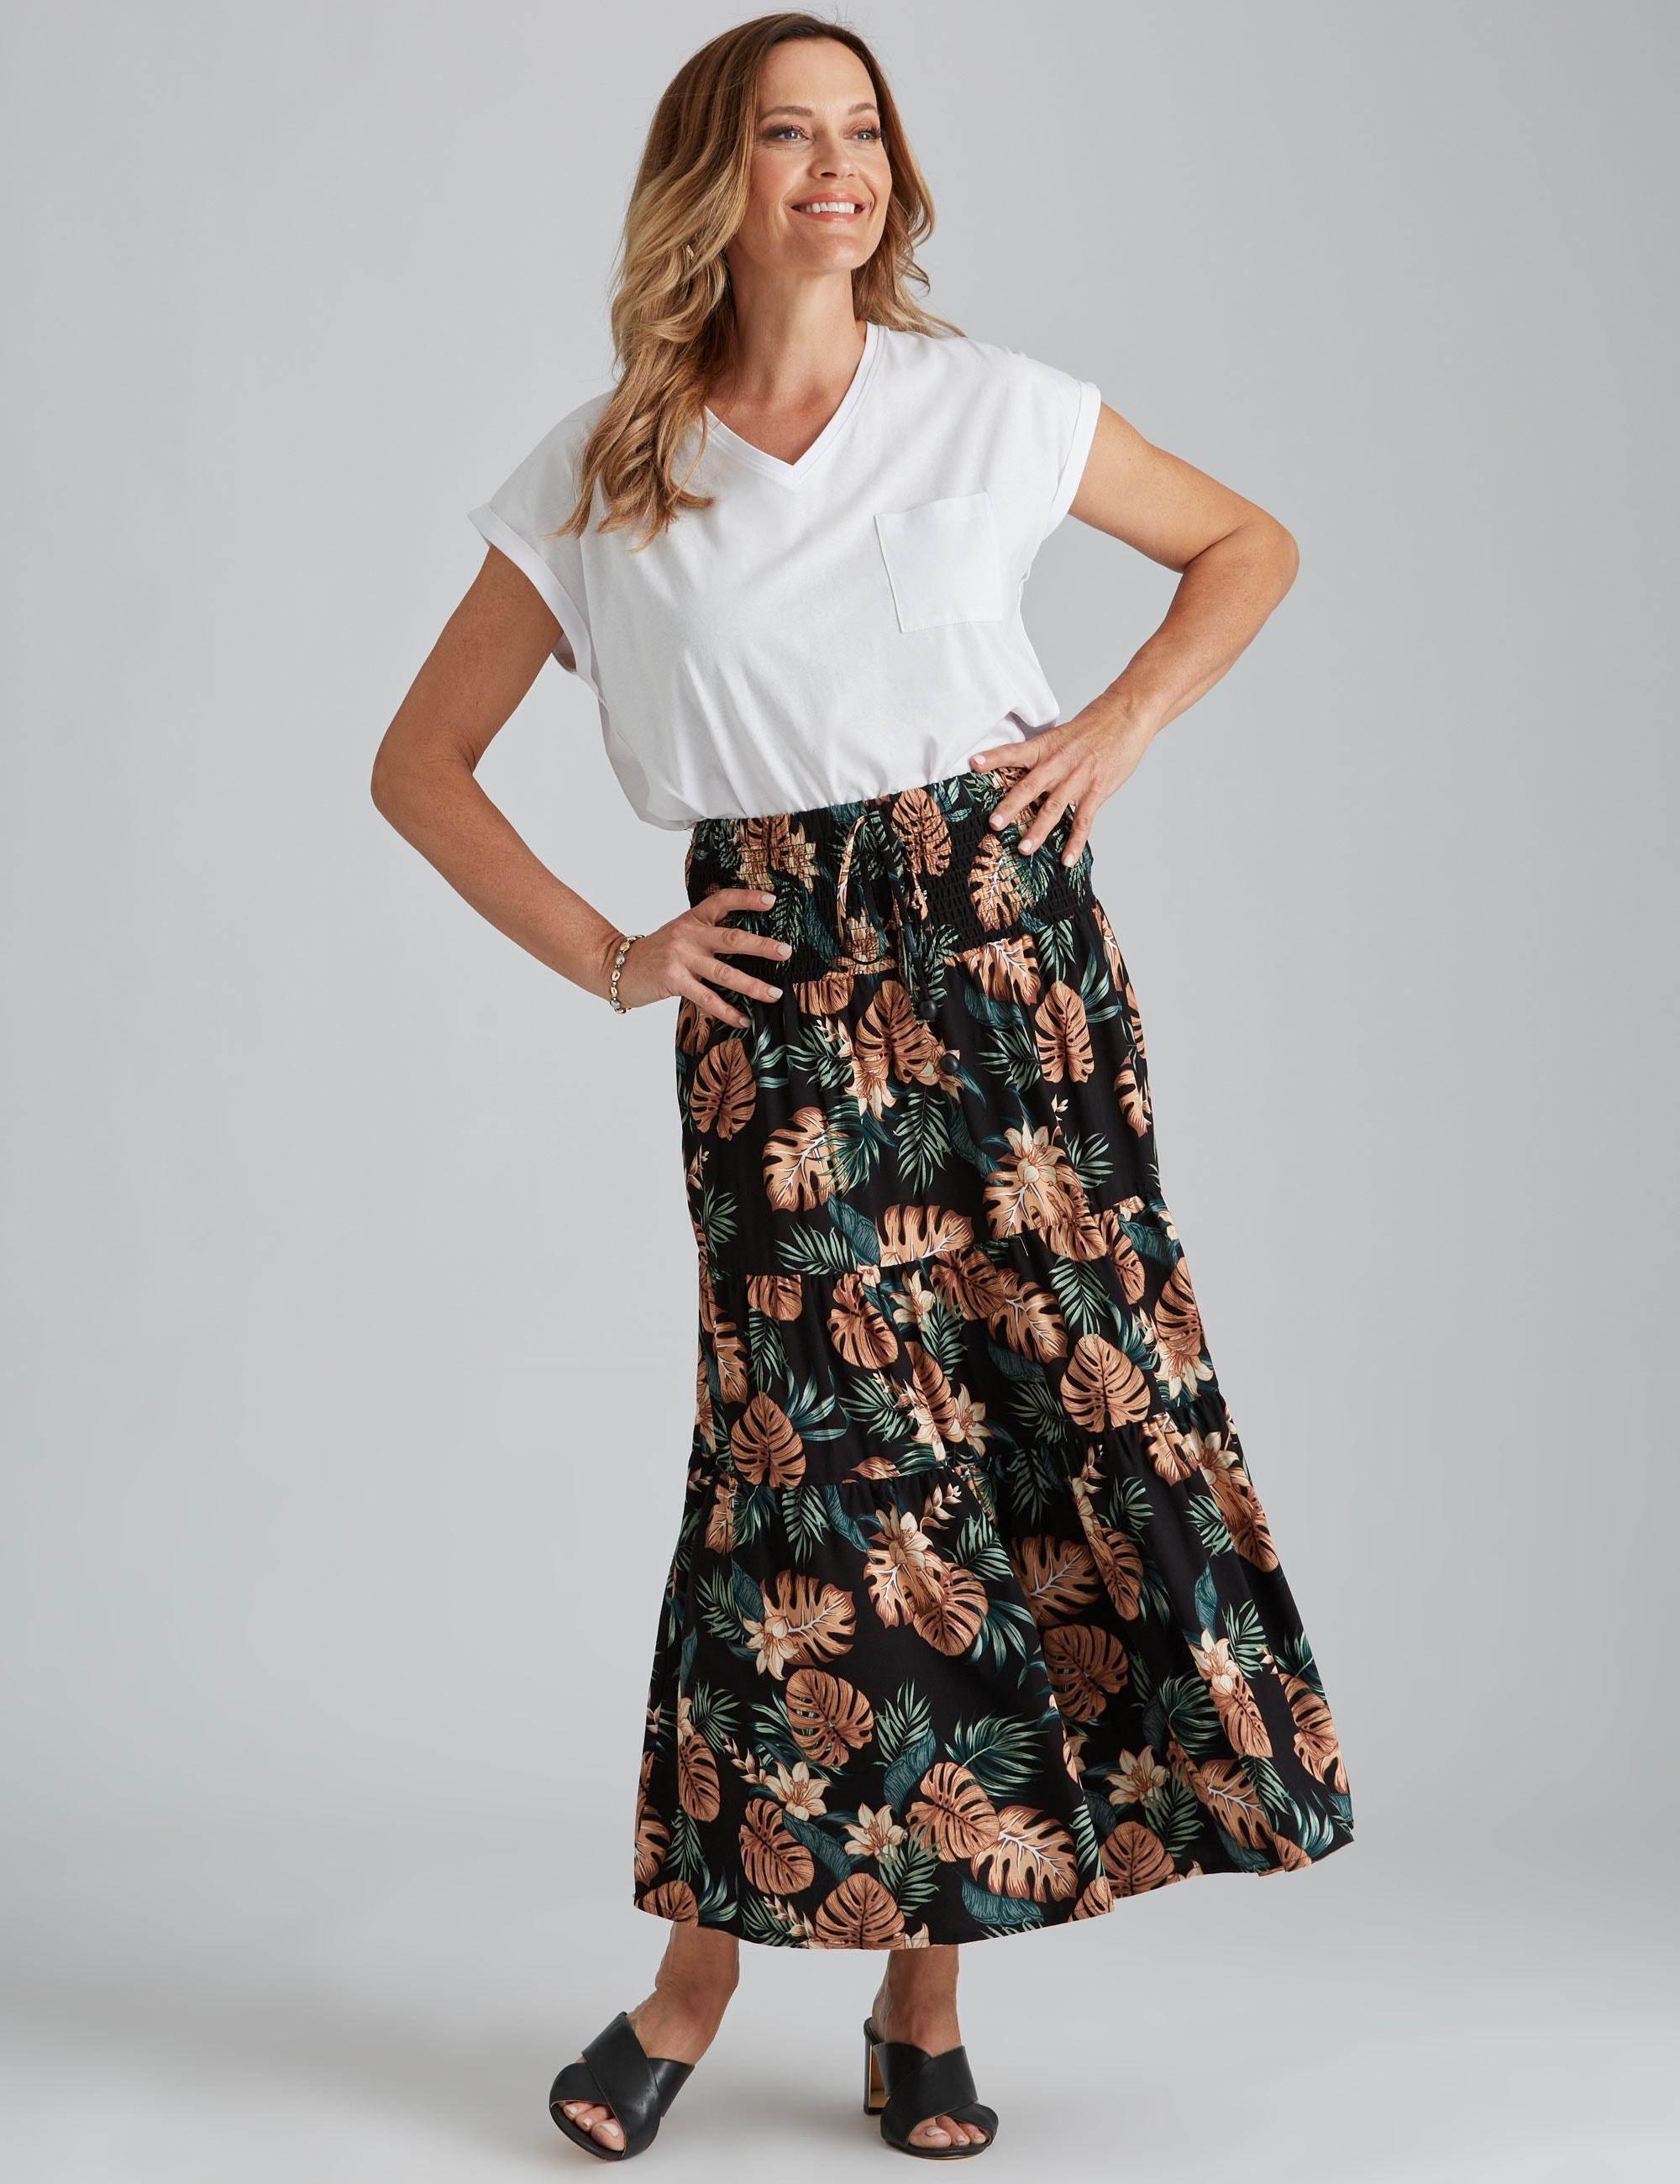 MILLERS - Womens Skirts - Maxi - Summer - Green - Floral - Straight - Fashion - Khaki Leaf - Relaxed Fit - Tiered - Long - Quality Work Clothes